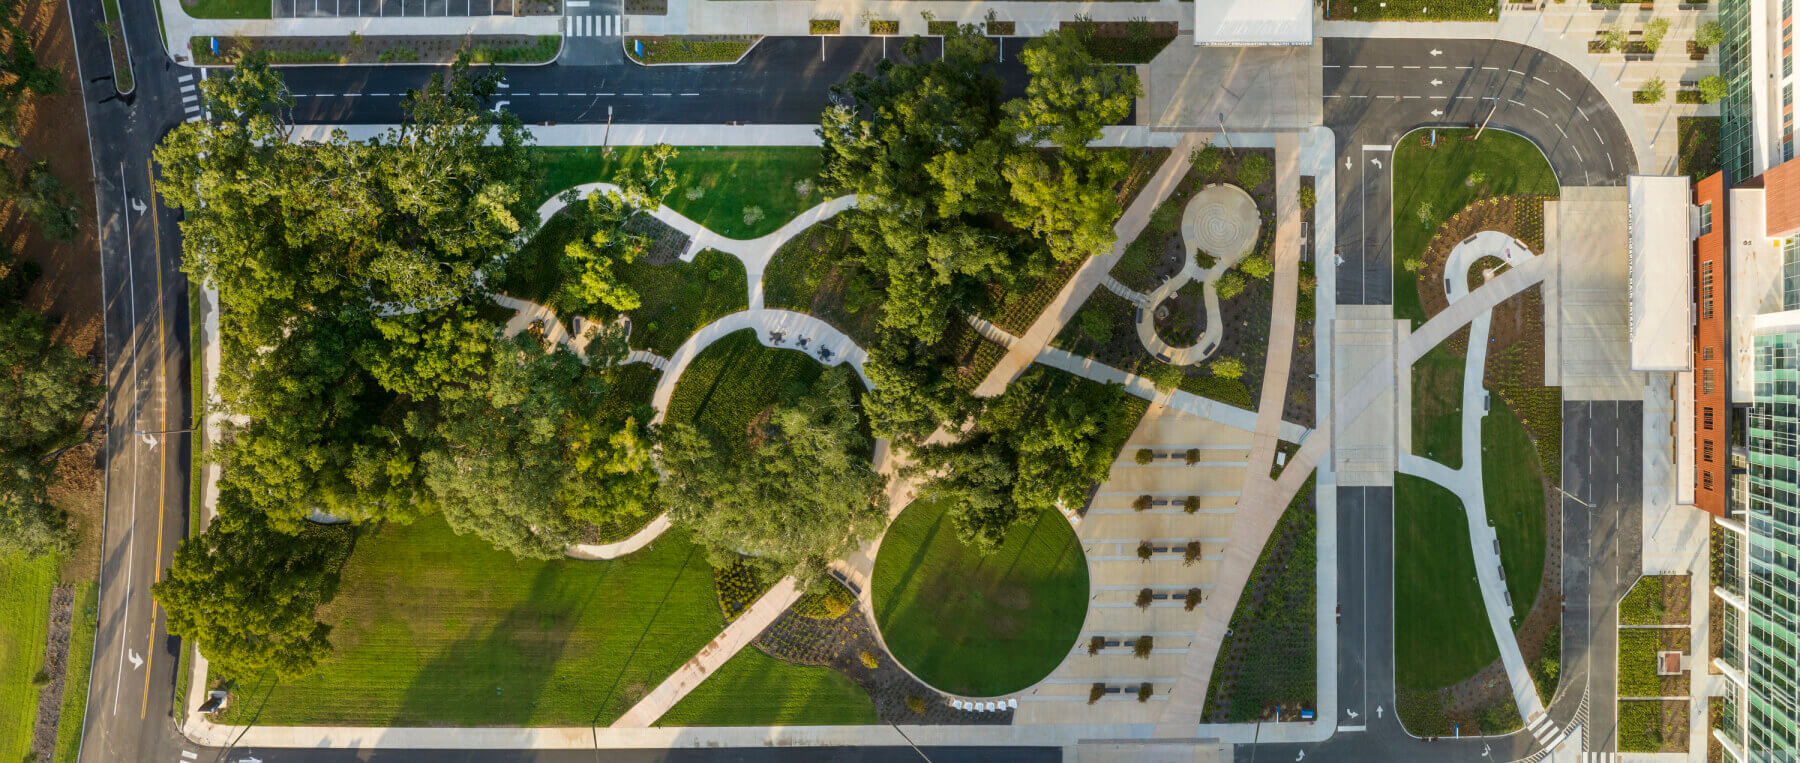 aerial view of the town square park